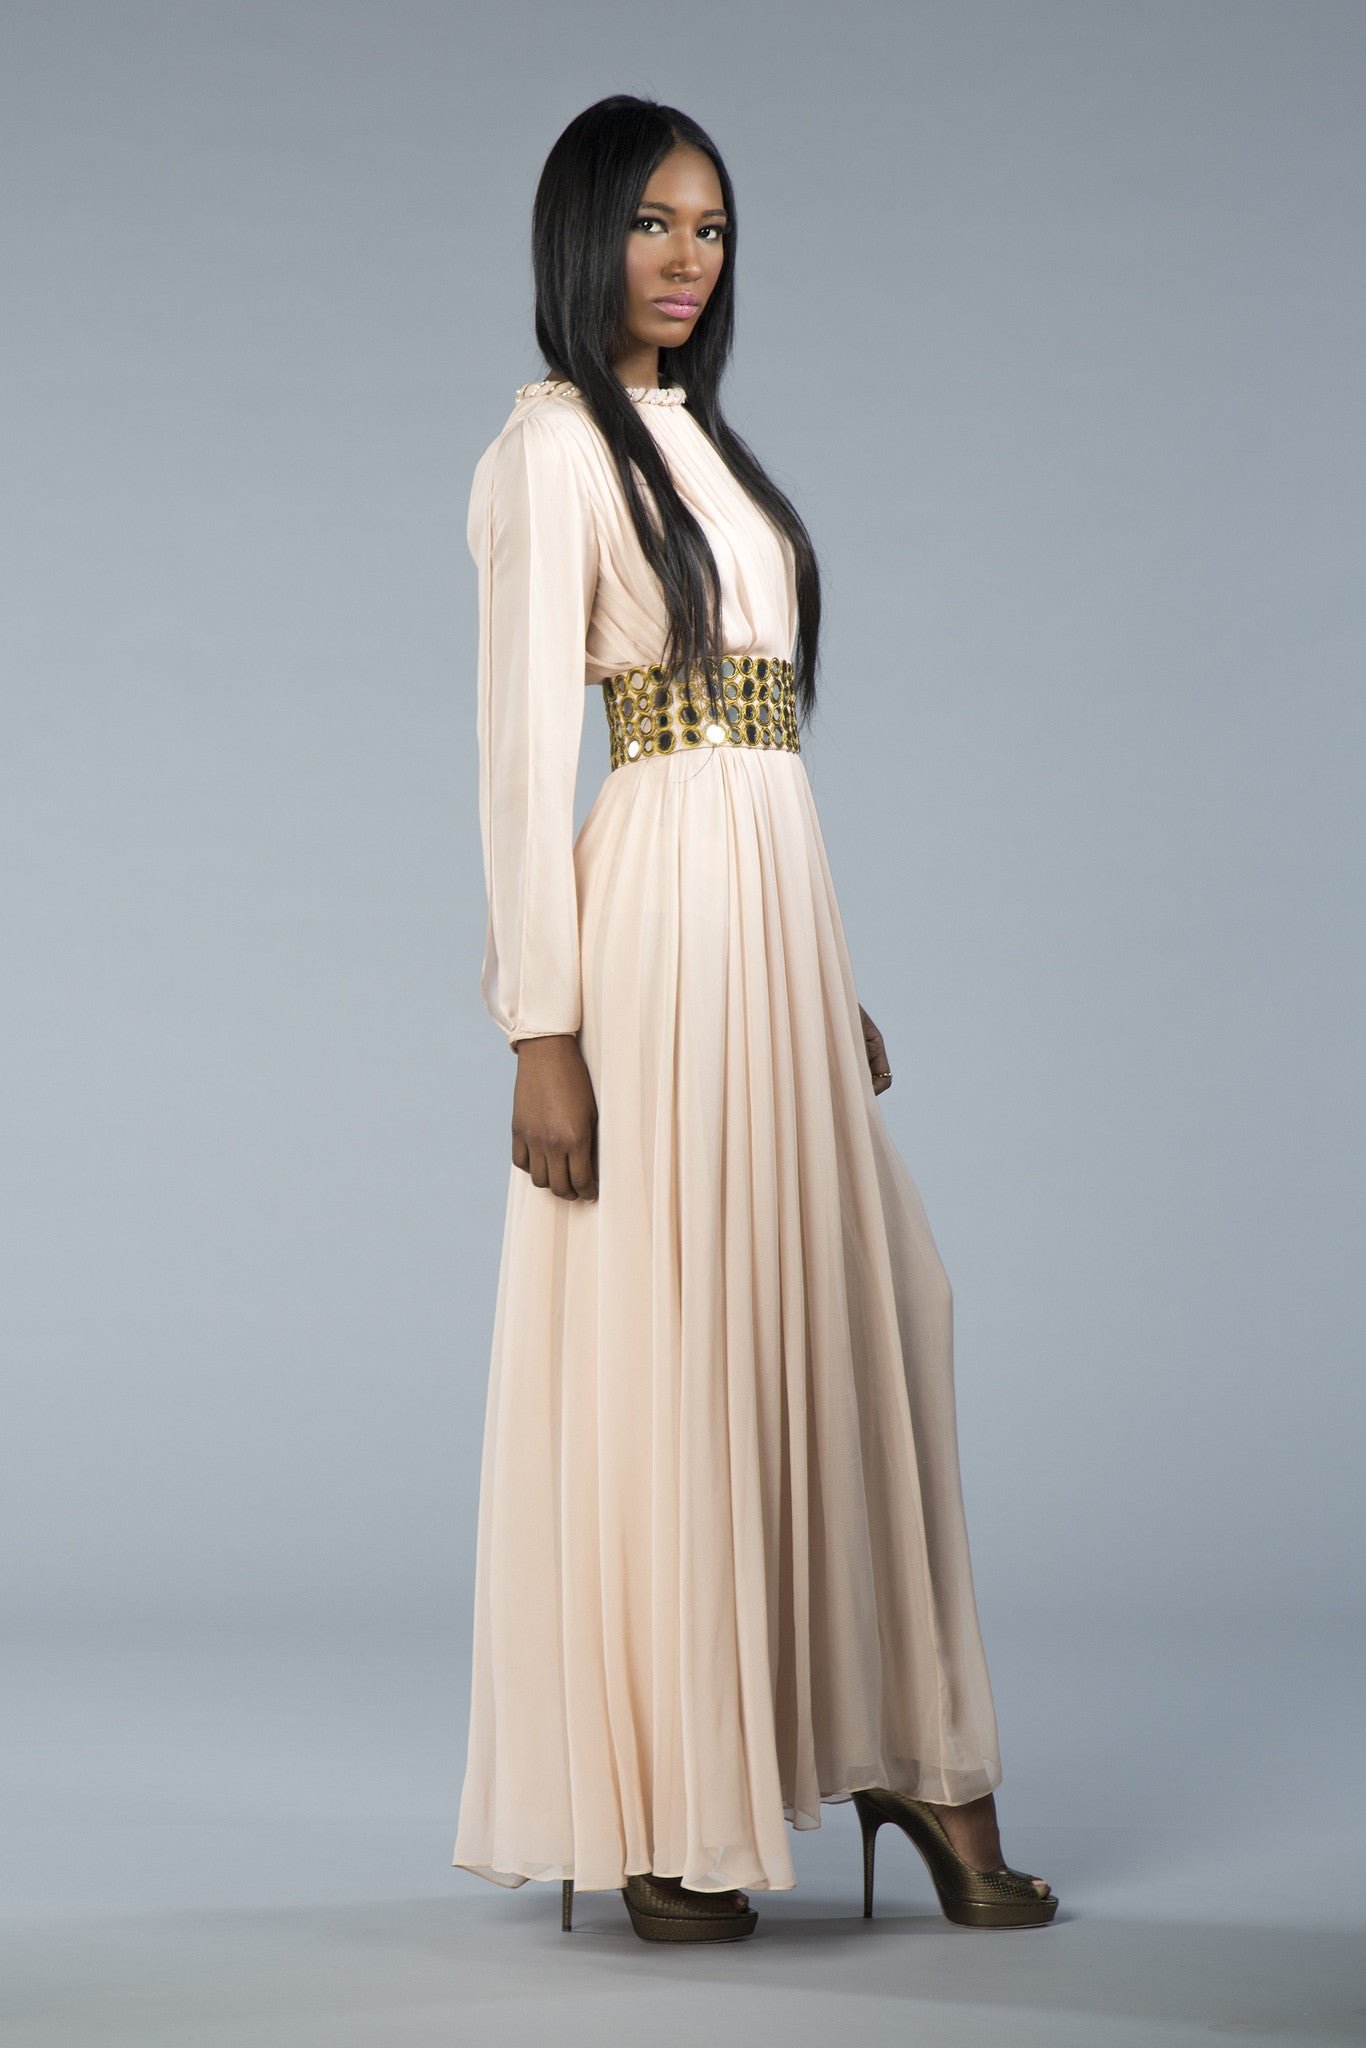 Light flowing gown, slit sleeves, embellished neck and belt with glass